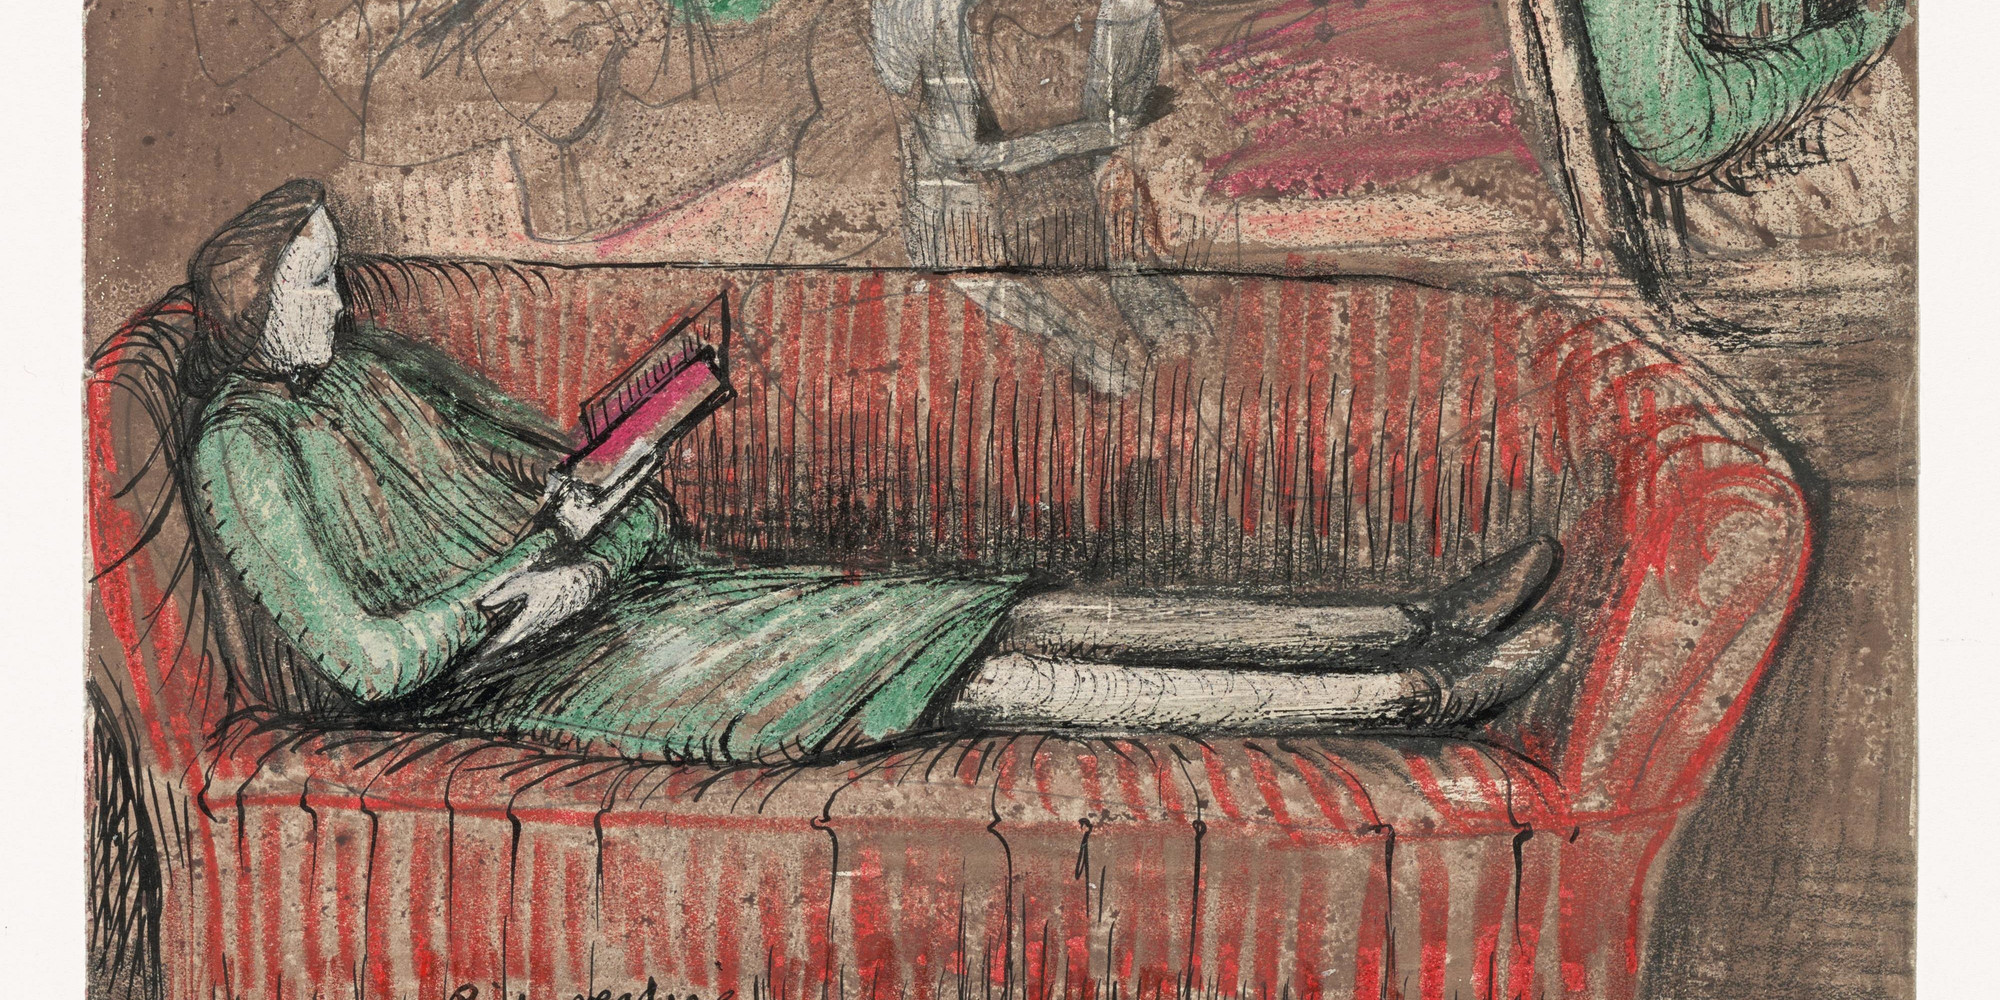 Henry Moore. Girl Reading. 1947. Watercolor, ink, crayon, and pencil on paper, 11 1/2 × 9 1/2&#34; (29.2 × 24.1 cm). The Joan and Lester Avnet Collection. © 2020 Artists Rights Society (ARS), New York/DACS, London